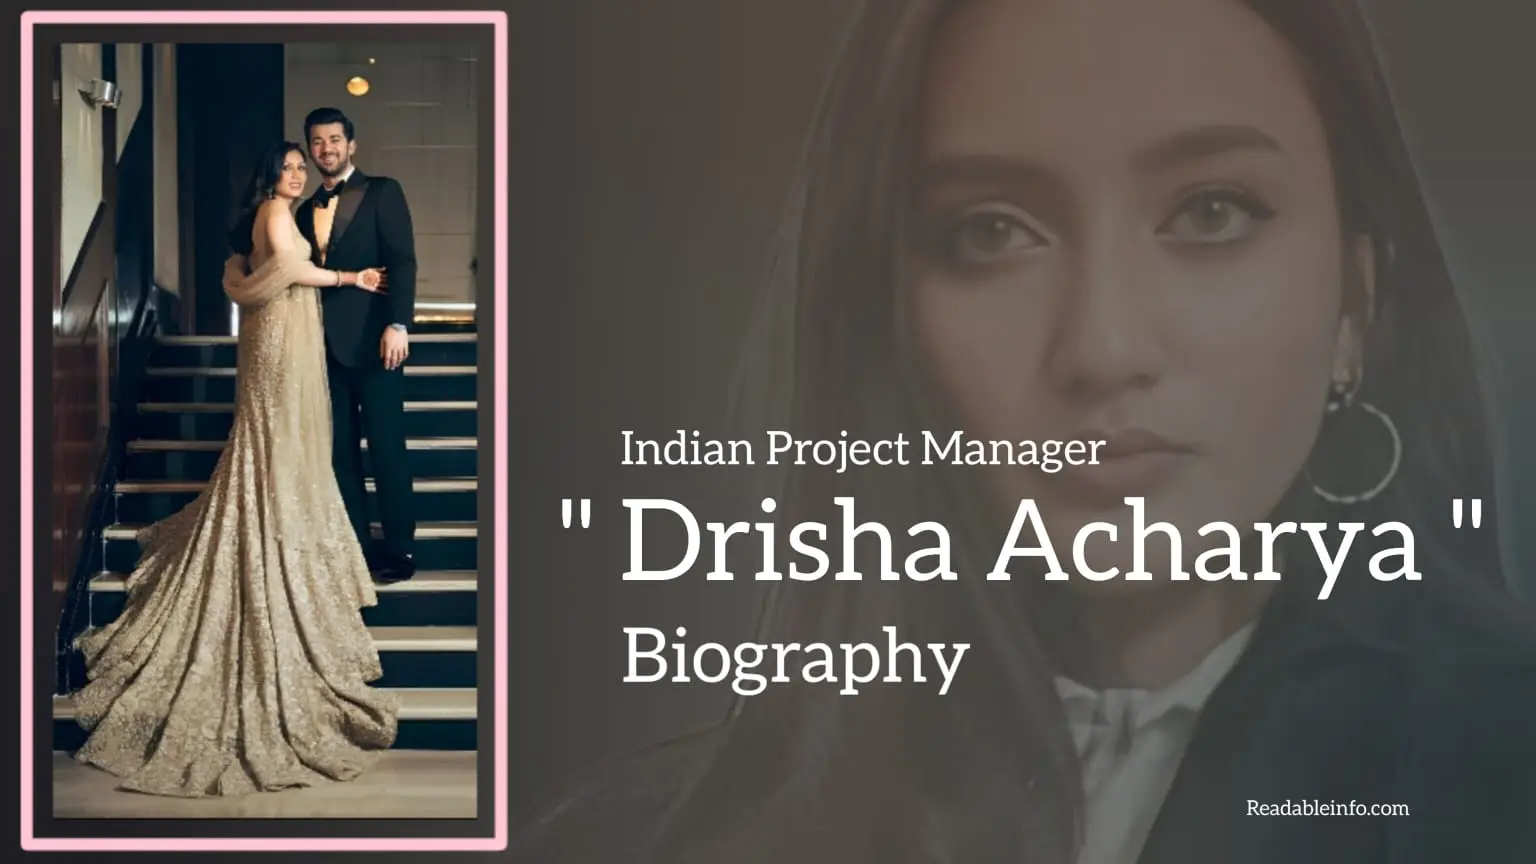 You are currently viewing Drisha Acharya Biography (Indian project manager)